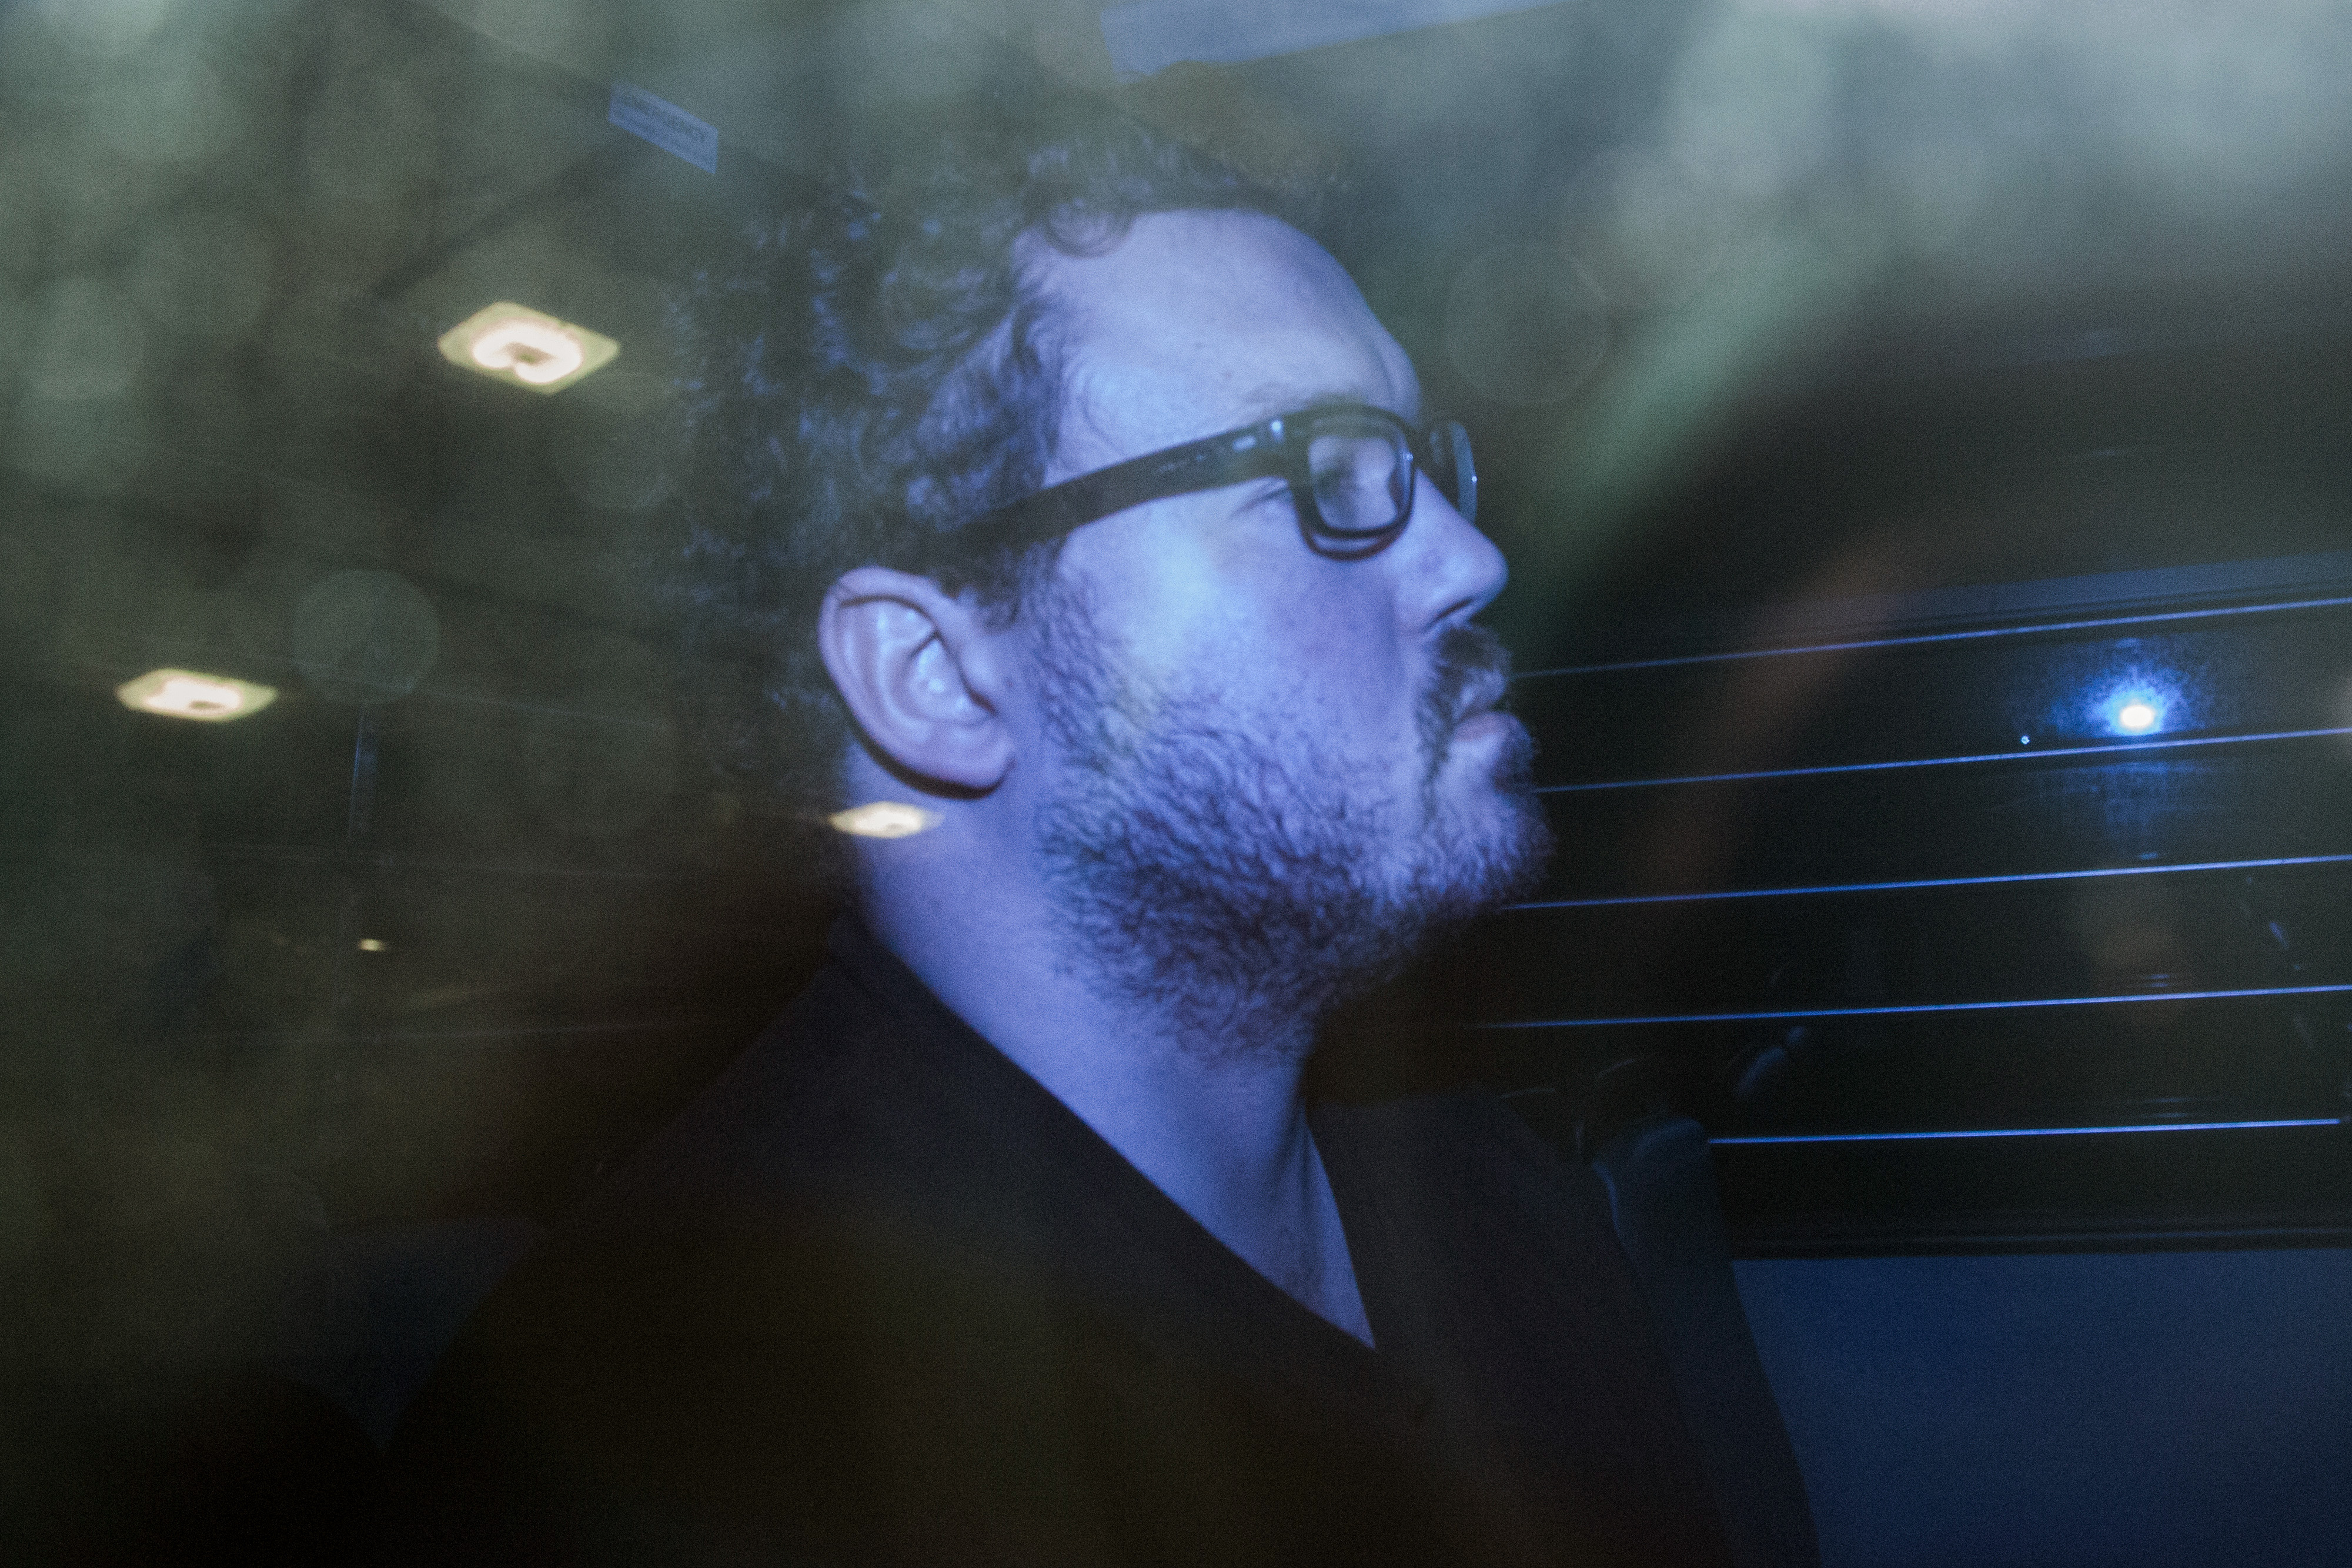 Rurik George Caton Jutting leaves the Eastern Magistrates' Court in a prison van in Hong Kong on Nov. 3, 2014 (Bloomberg/Getty Images)